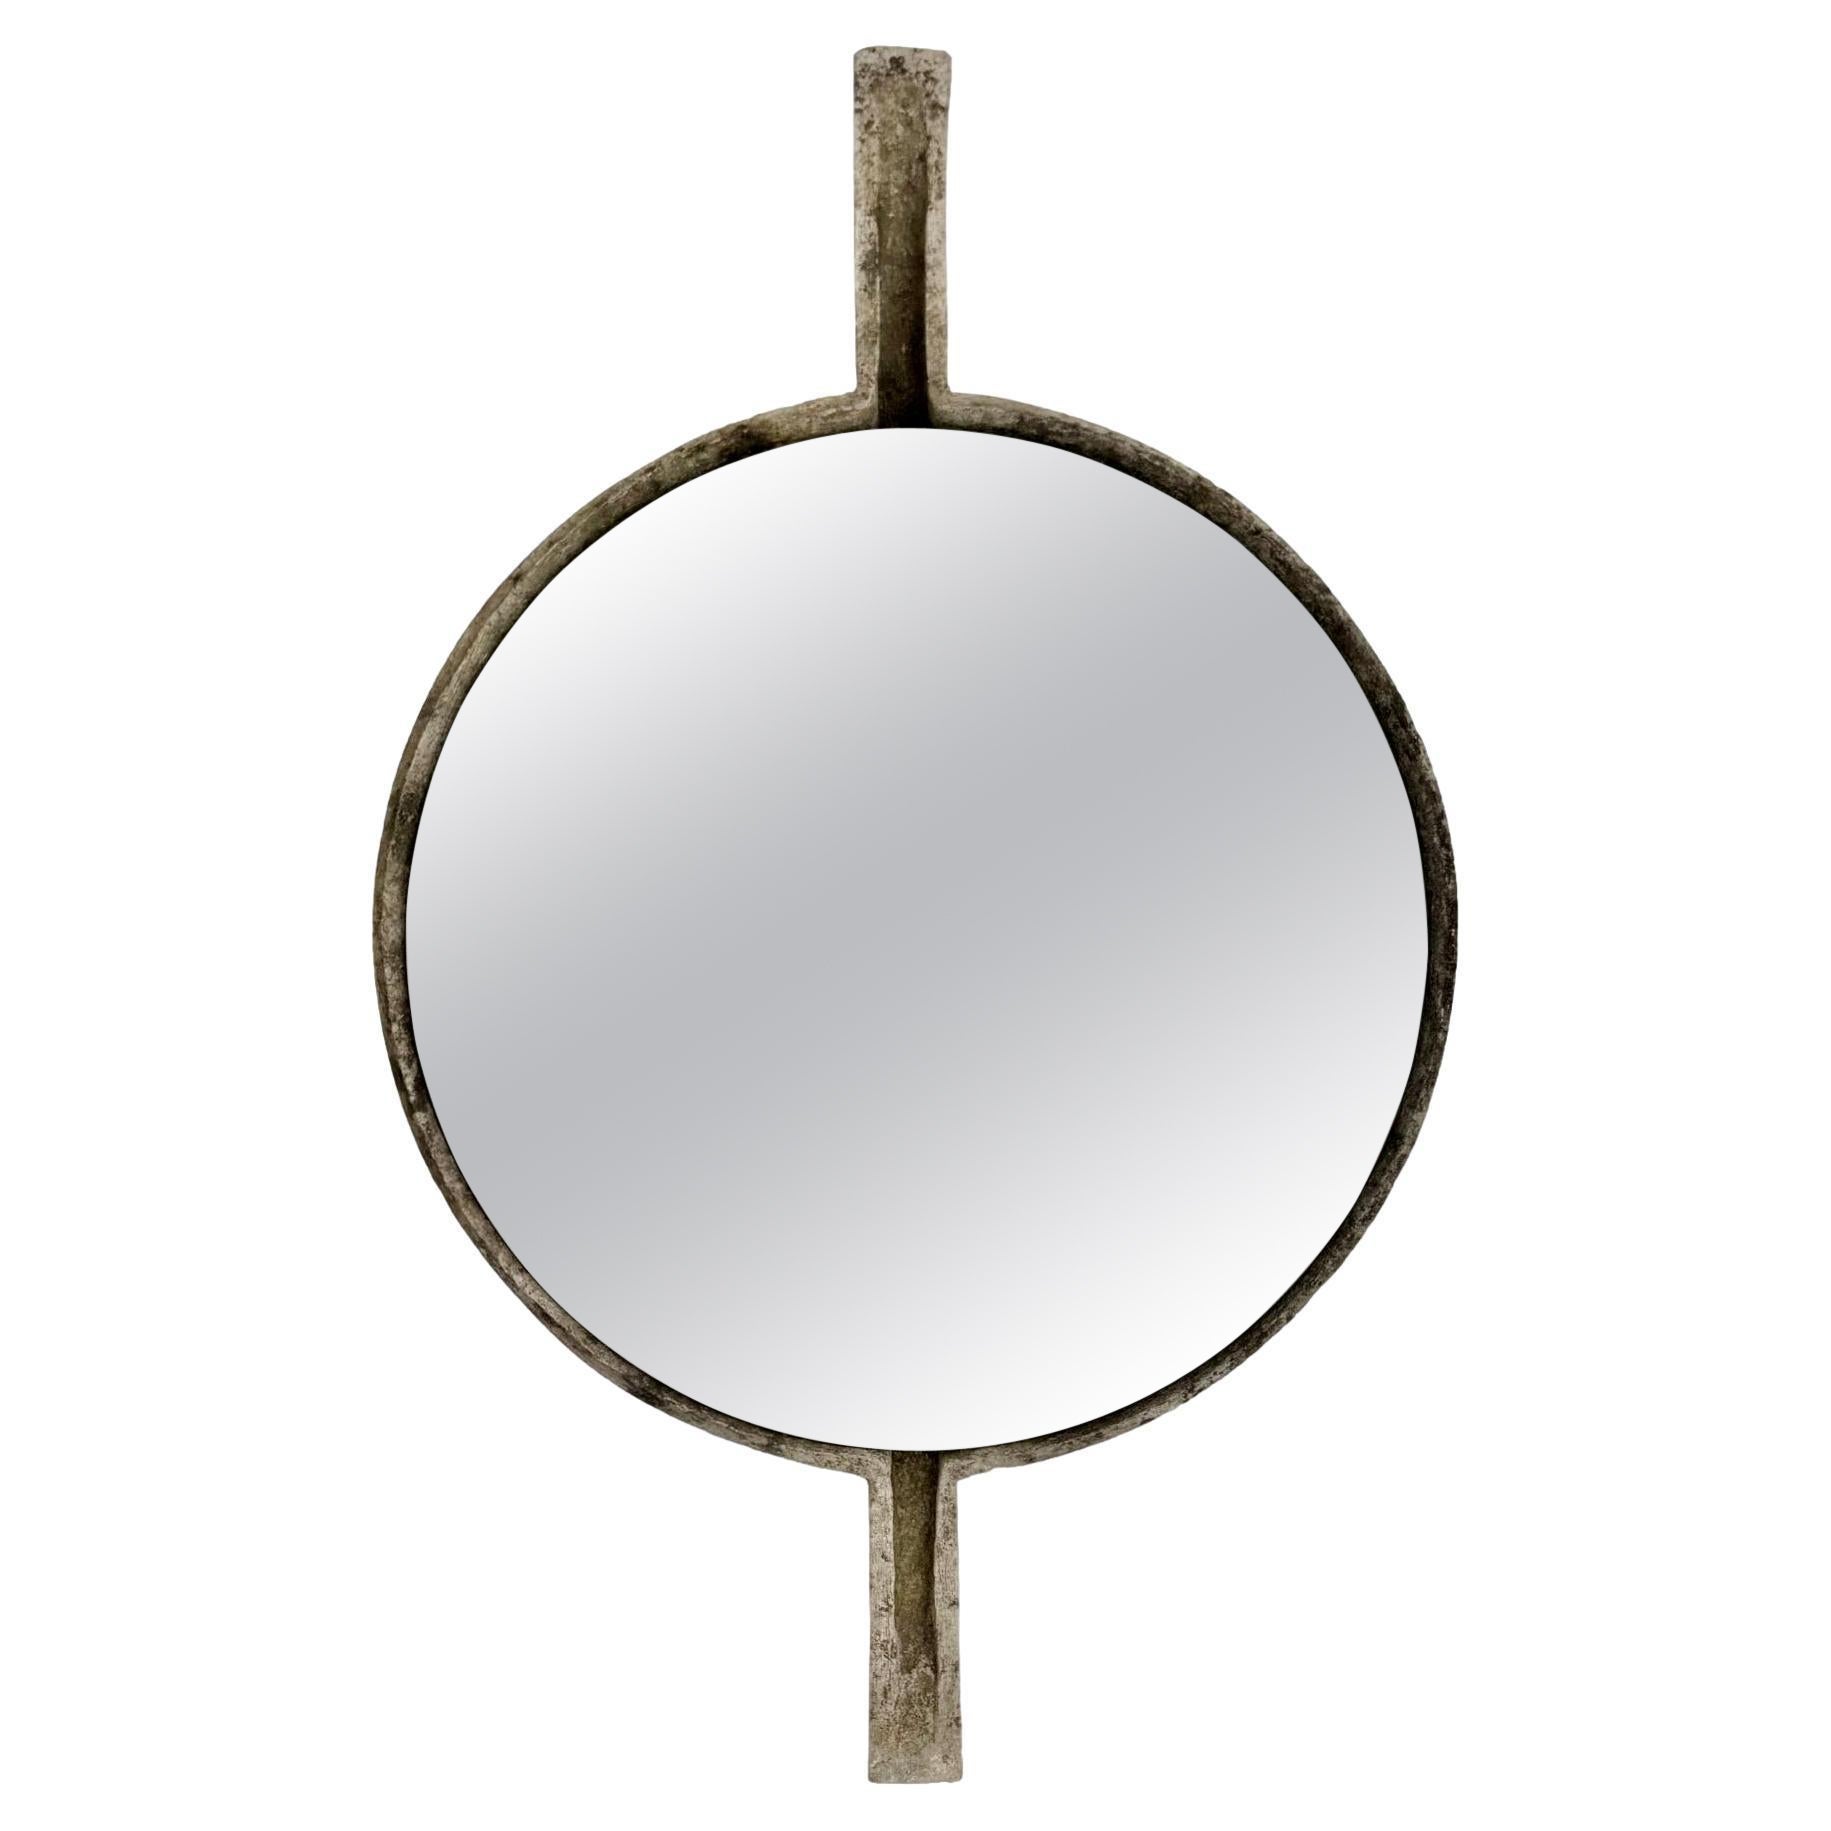 Willy Guhl Concrete Mirror with Spikes, 1960s Switzerland For Sale